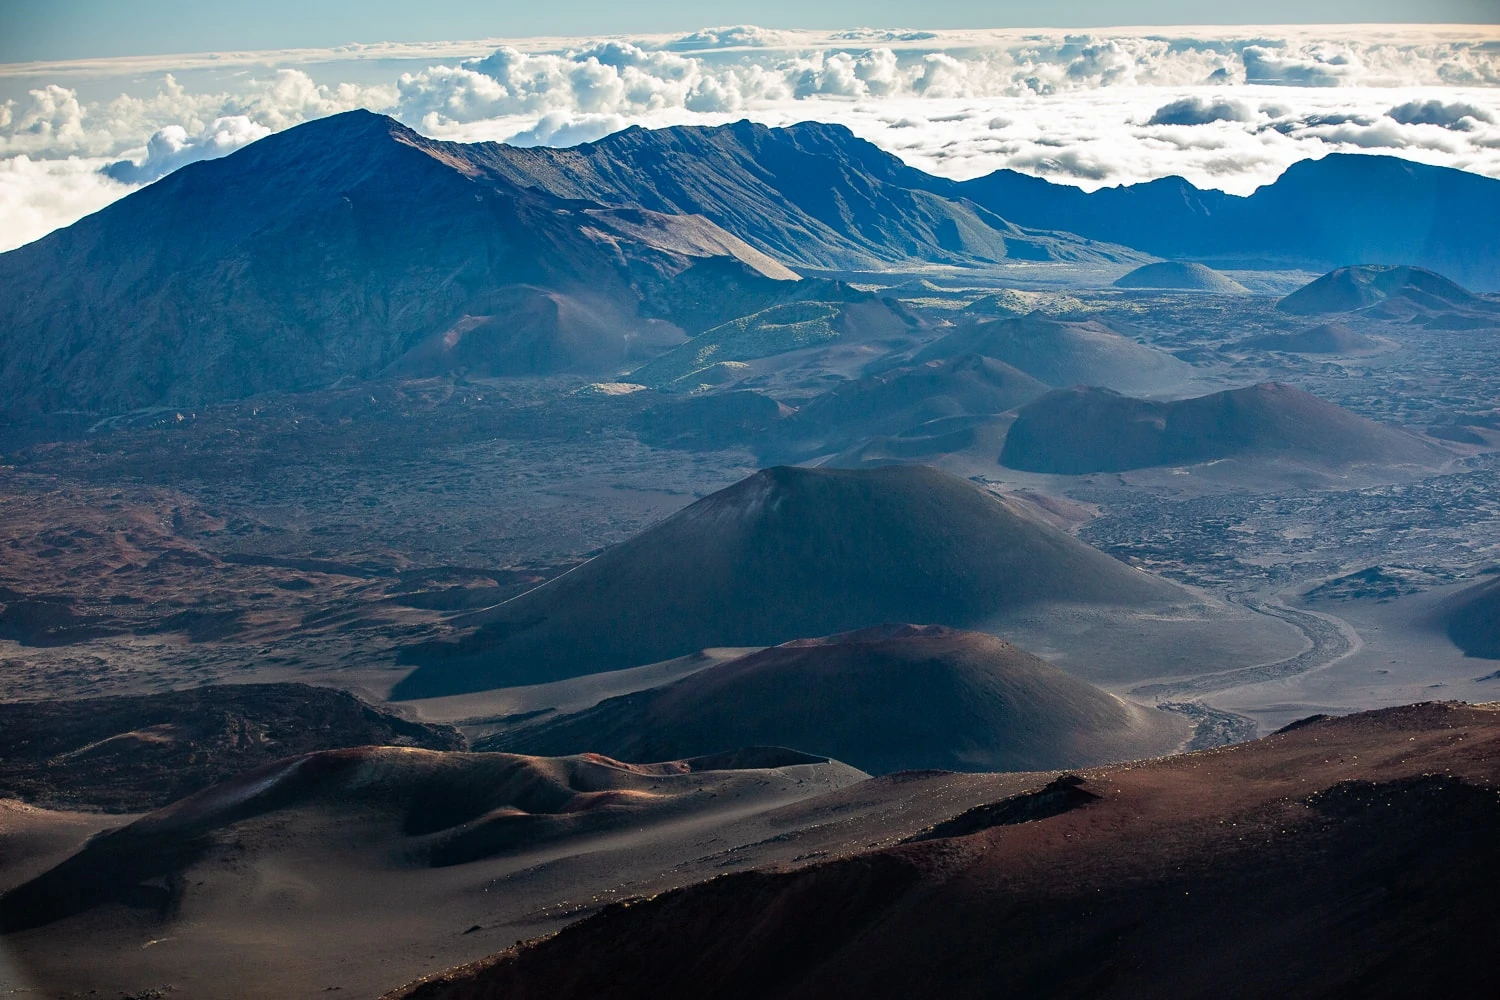 The crater and caldera of Haleakala volcano on Maui with many cones and volcanic vents.